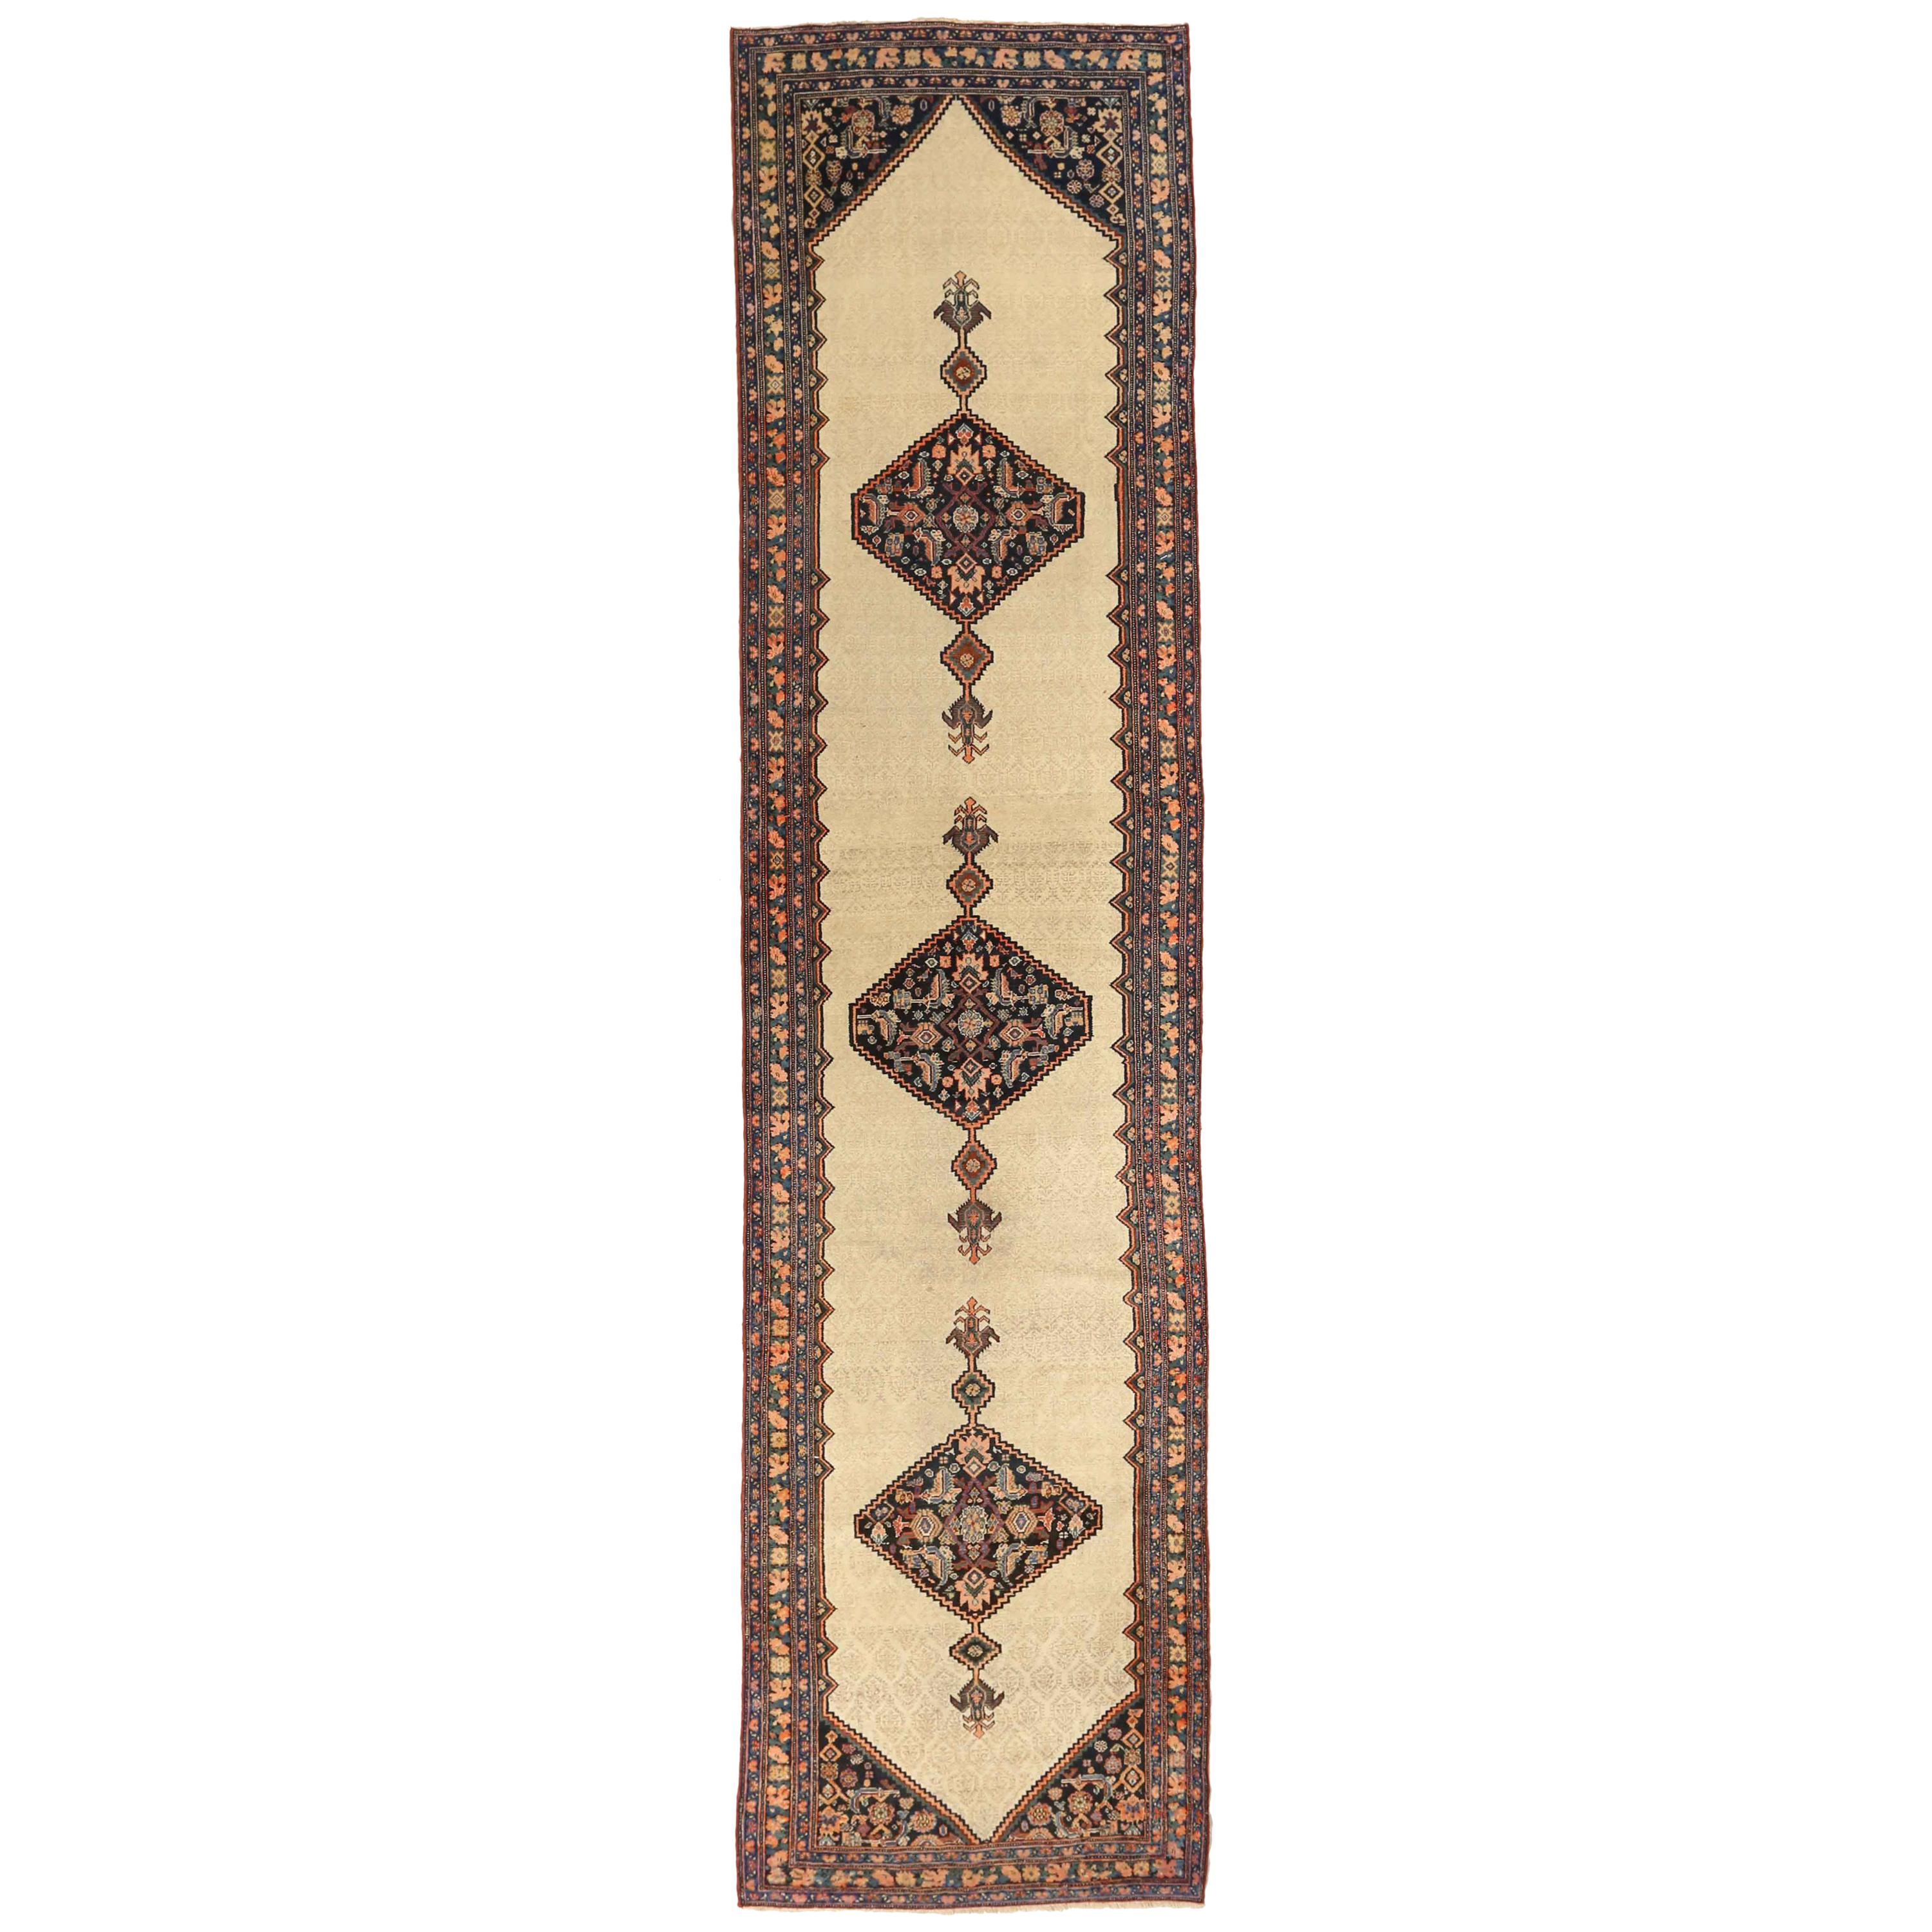 Twin 1920s Antique Persian Rug Malayer Design with Grand Tribal and Floral Deta For Sale